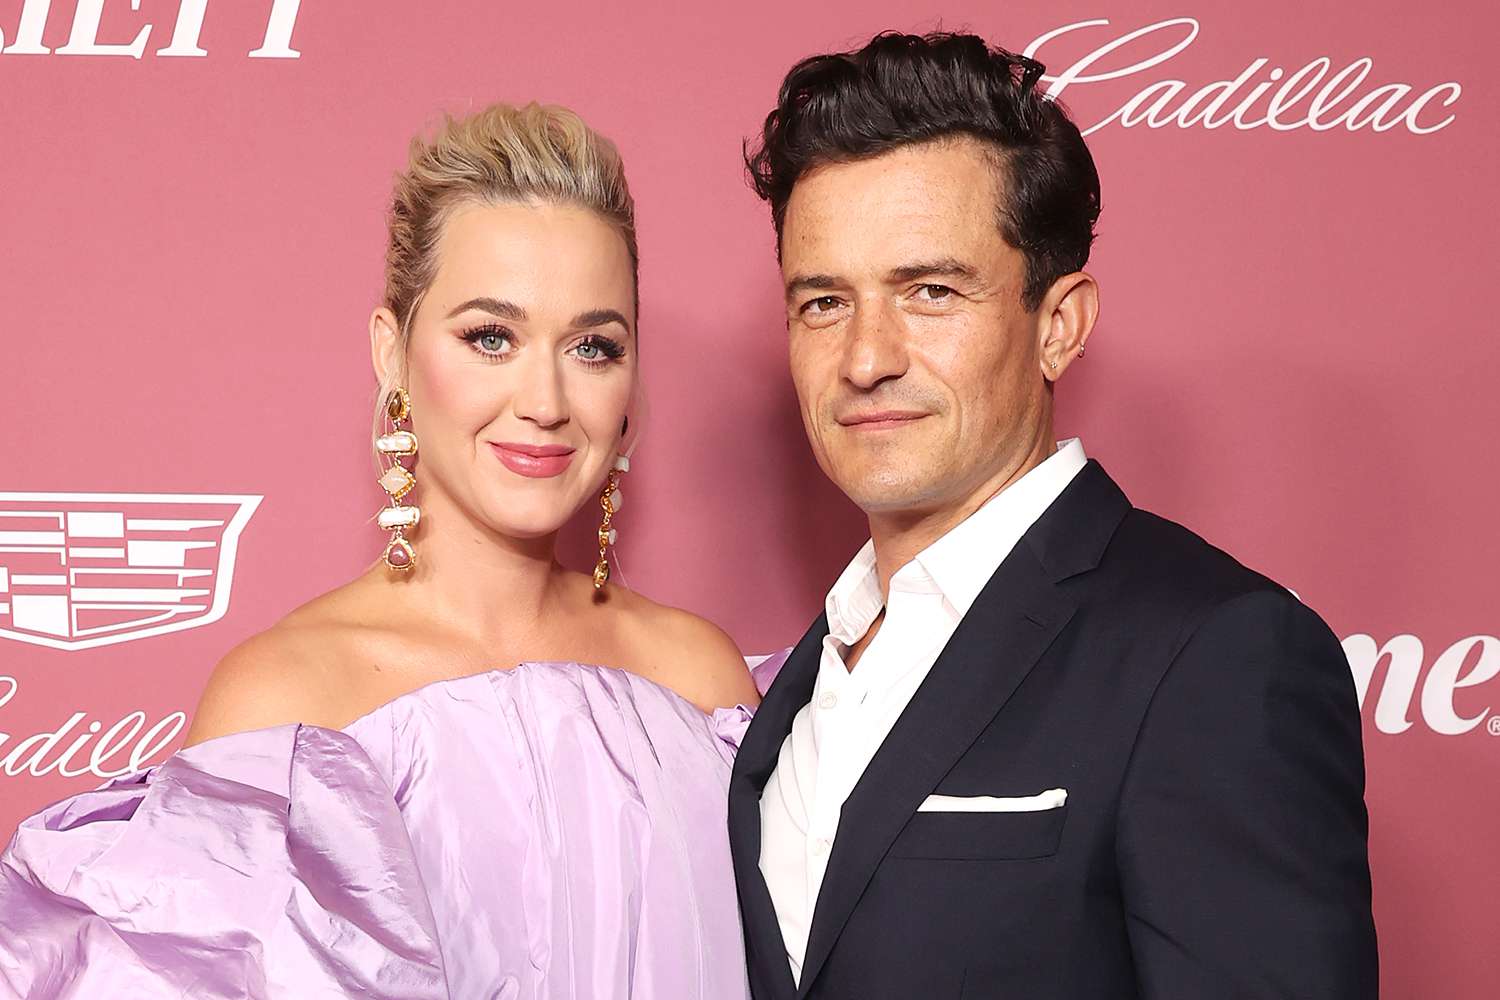 Katy Perry wearing a purple dress and Orlando Bloom wearing a black suit